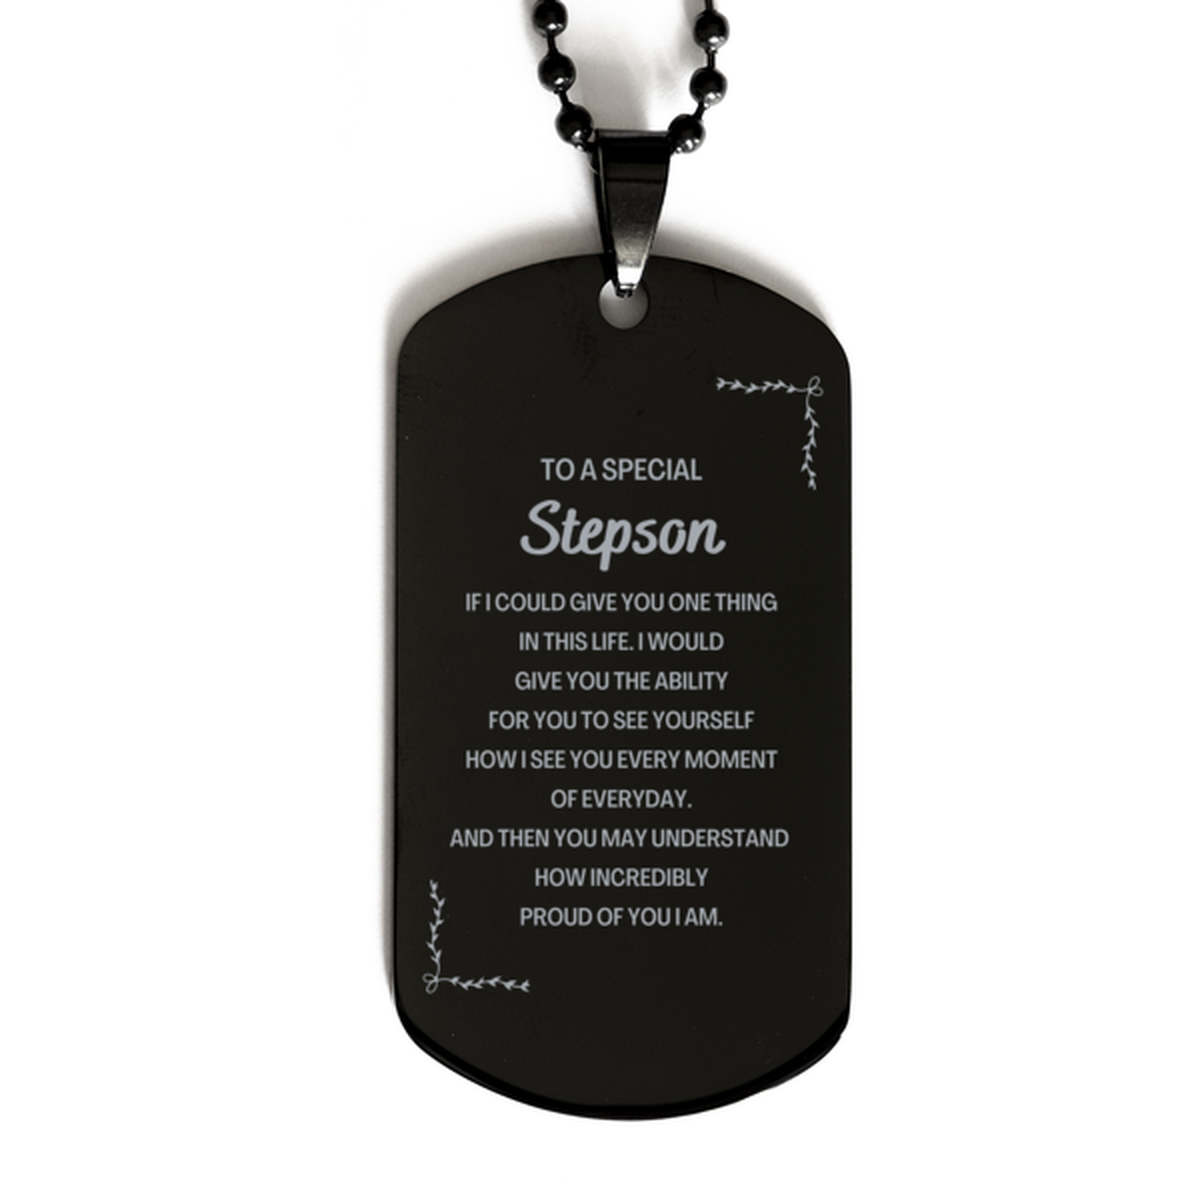 To My Stepson Black Dog Tag, Gifts For Stepson Engraved, Inspirational Gifts for Christmas Birthday, Epic Gifts for Stepson To A Special Stepson how incredibly proud of you I am